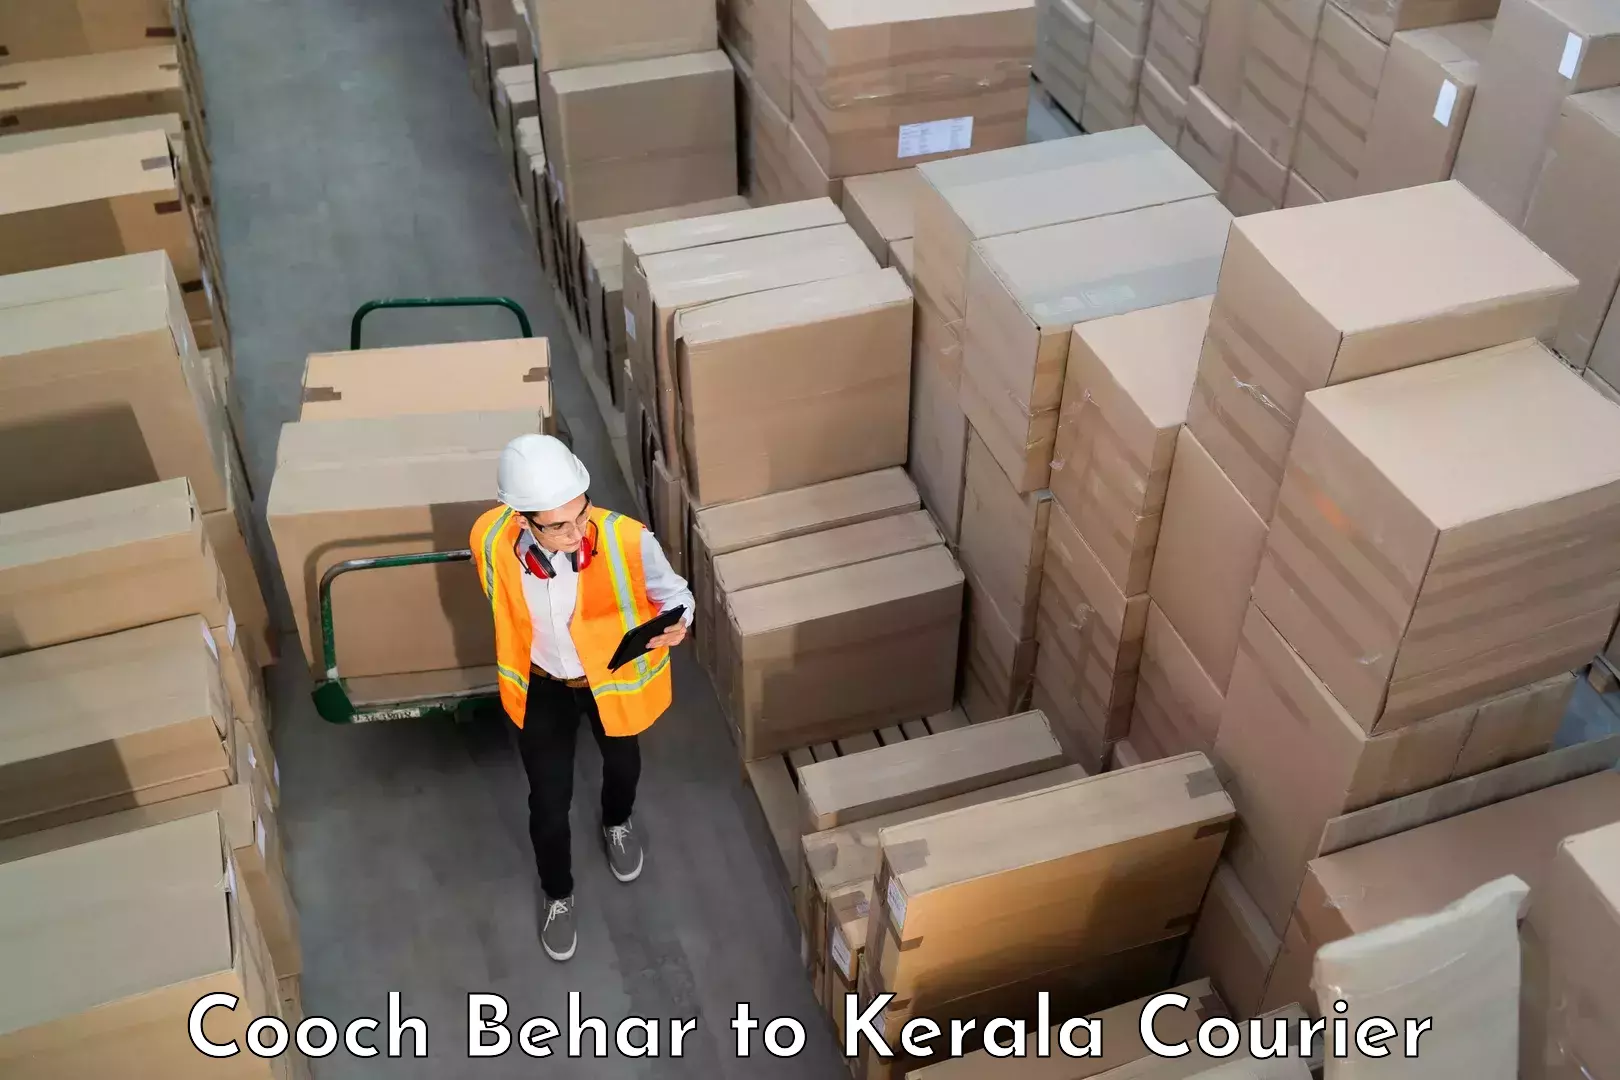 Luggage transport solutions Cooch Behar to Cochin University of Science and Technology